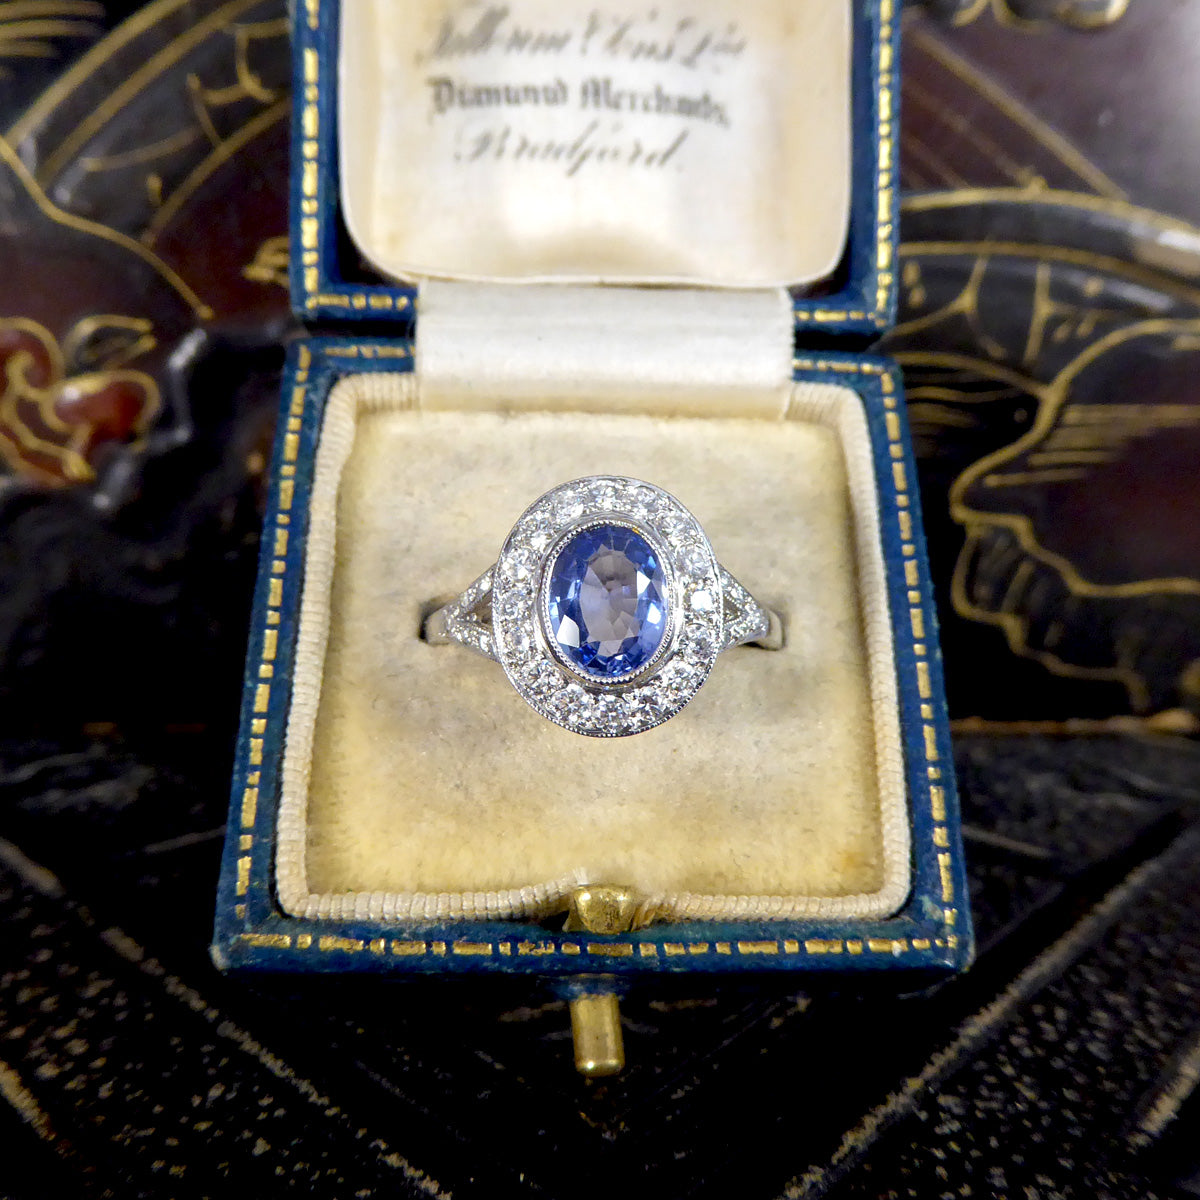 Art Deco Style 1.50ct Sapphire and Diamond Cluster Ring with Diamond Shoulders in Platinum